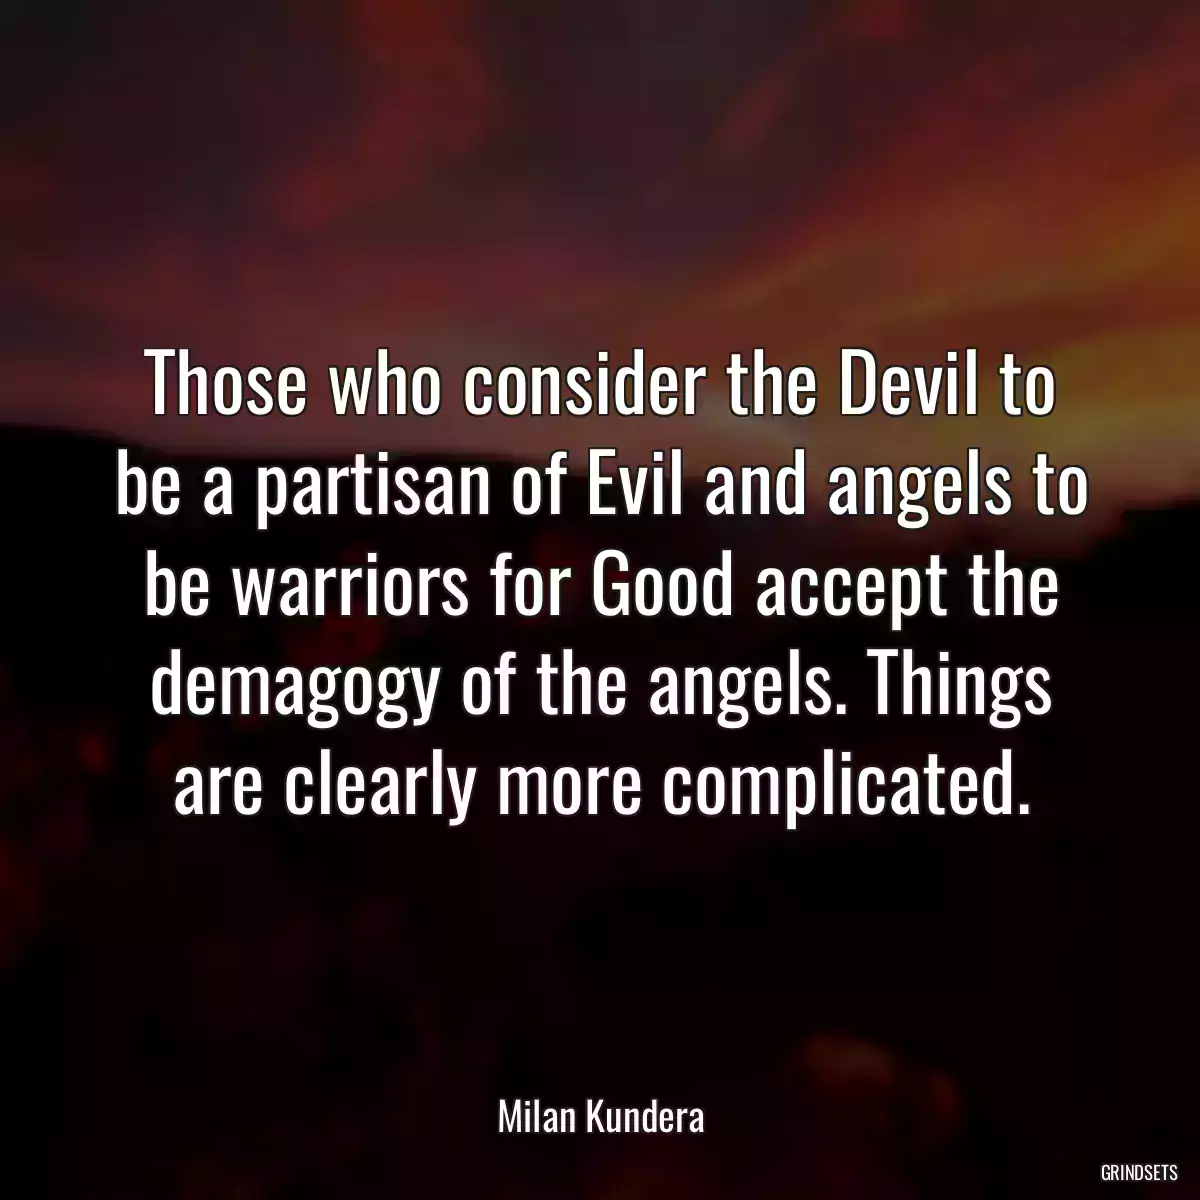 Those who consider the Devil to be a partisan of Evil and angels to be warriors for Good accept the demagogy of the angels. Things are clearly more complicated.